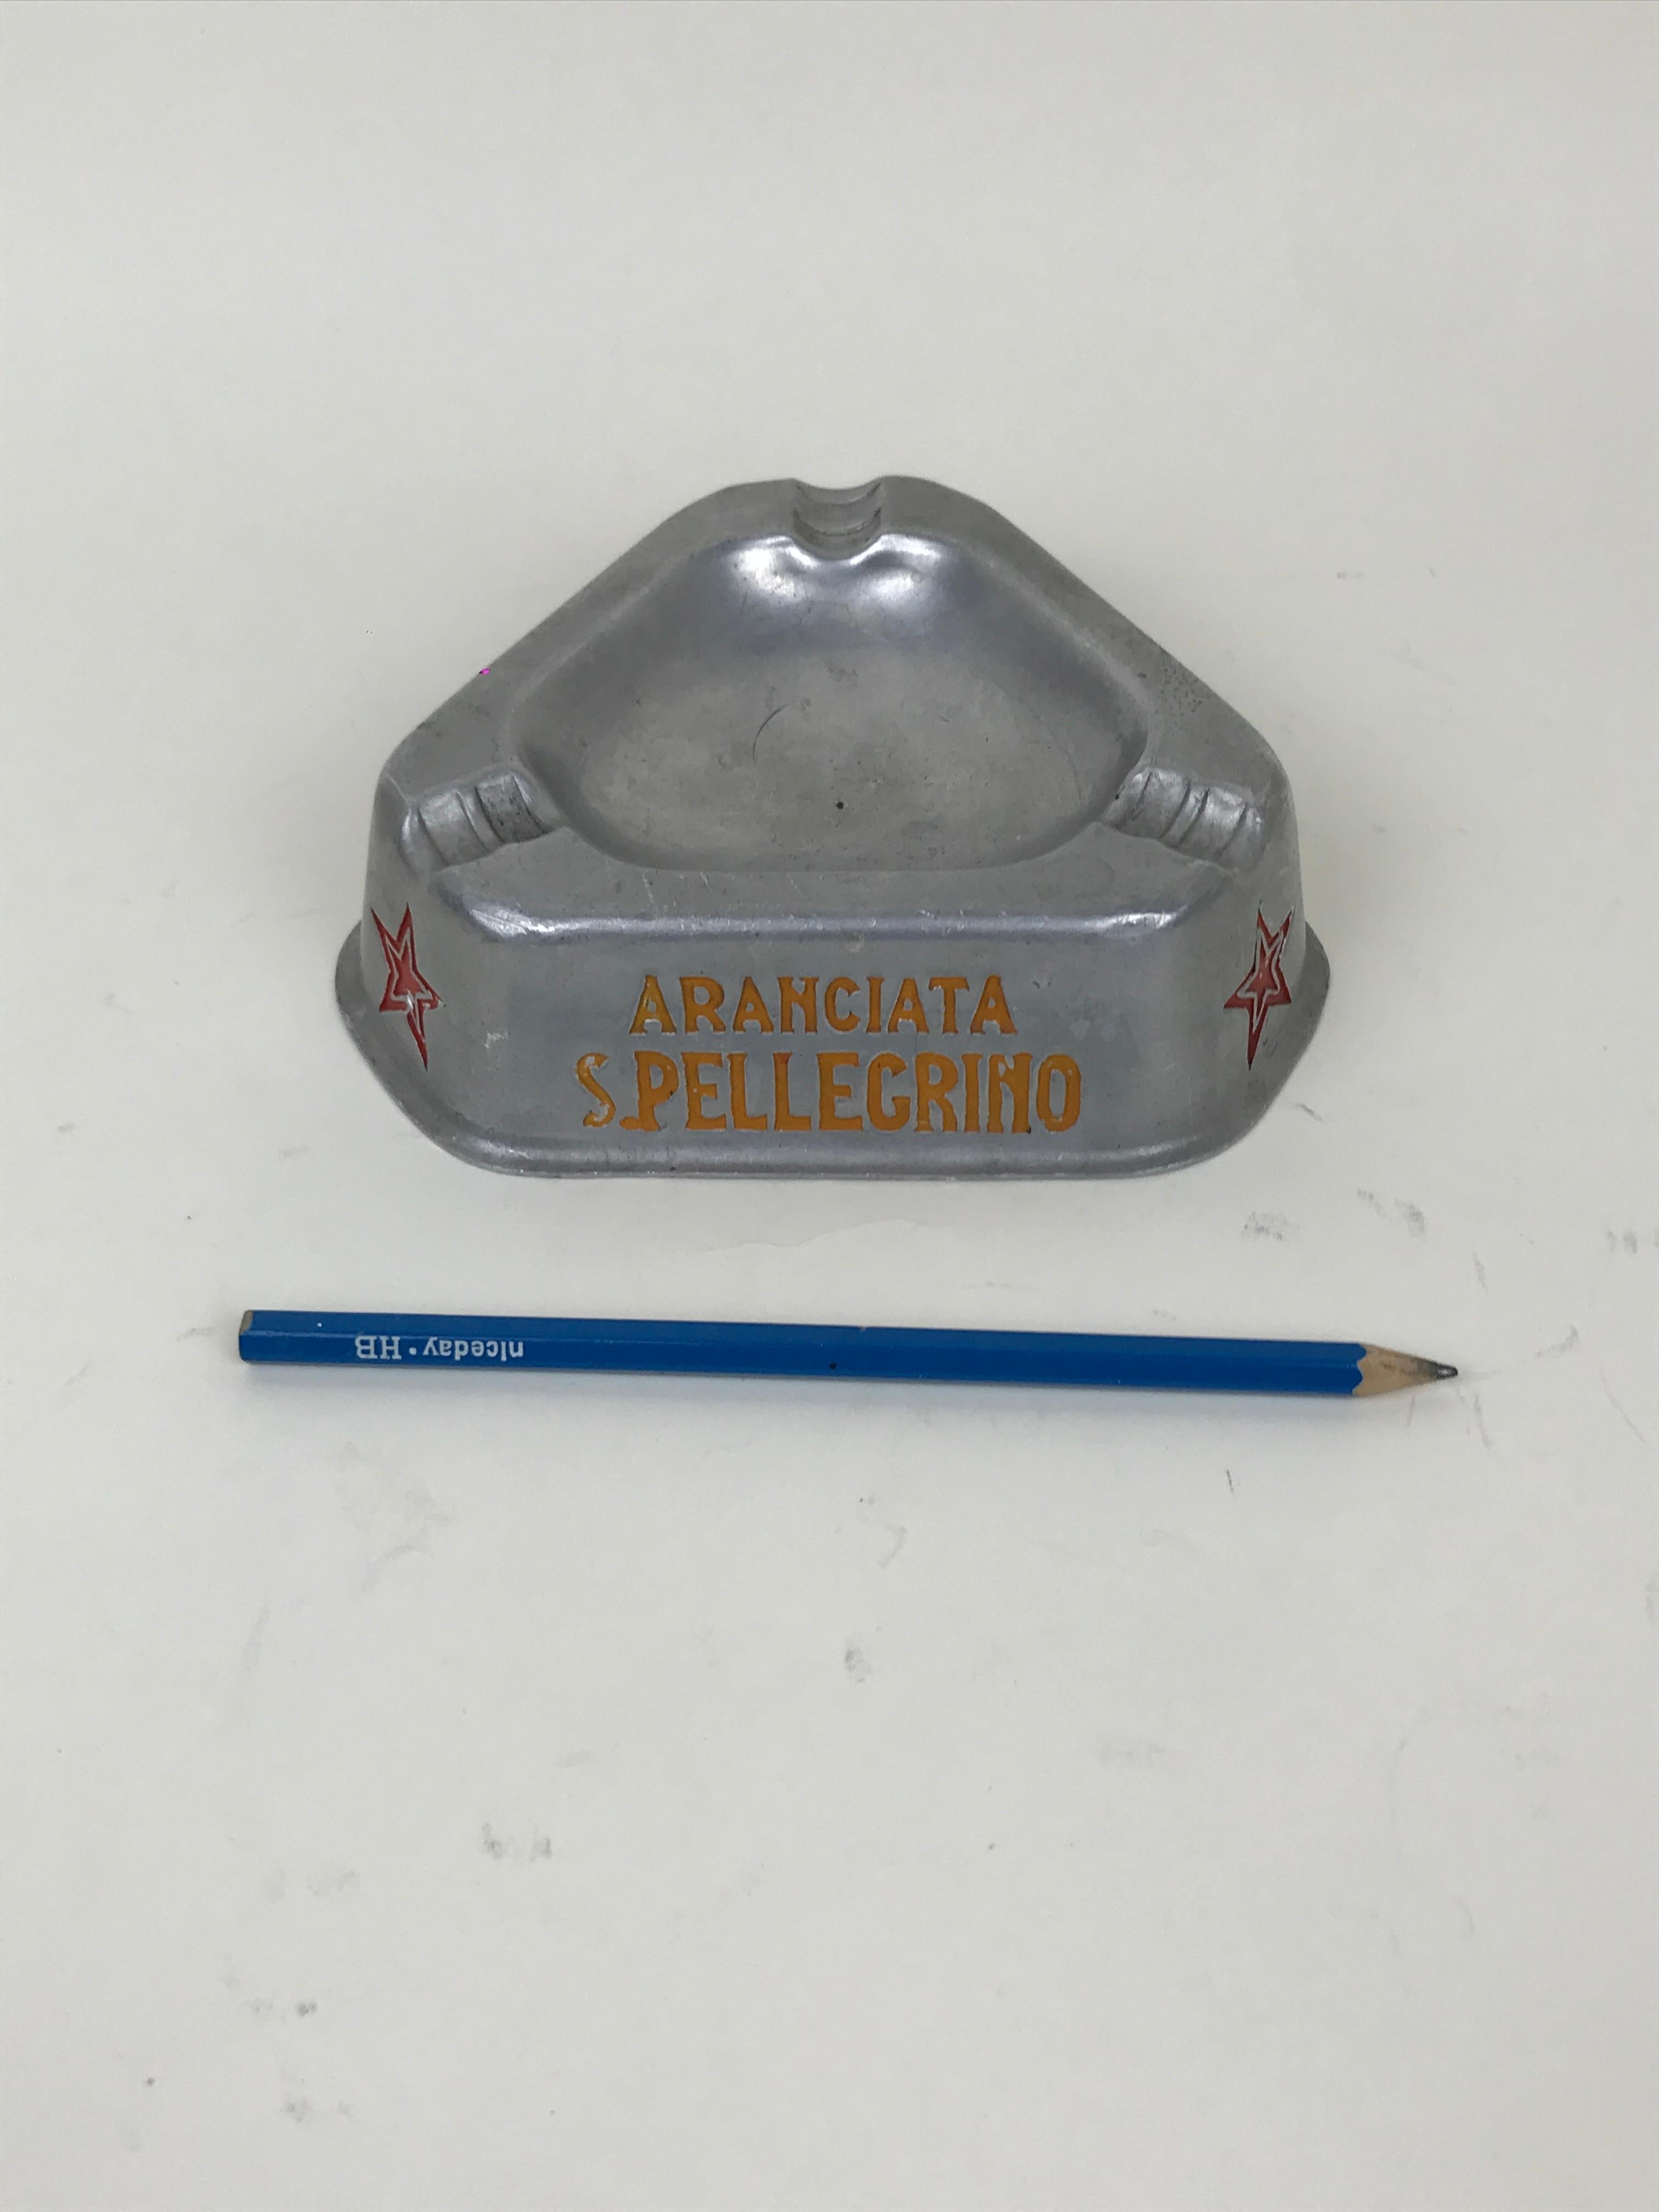 Vintage Italian advertising aluminum triangular ashtray San Pellegrino made in Italy in the 1960s.

Each side of the ashtray presents a advertising logo of a different San Pellegrino product in different color: Green ( Acqua Minerale San